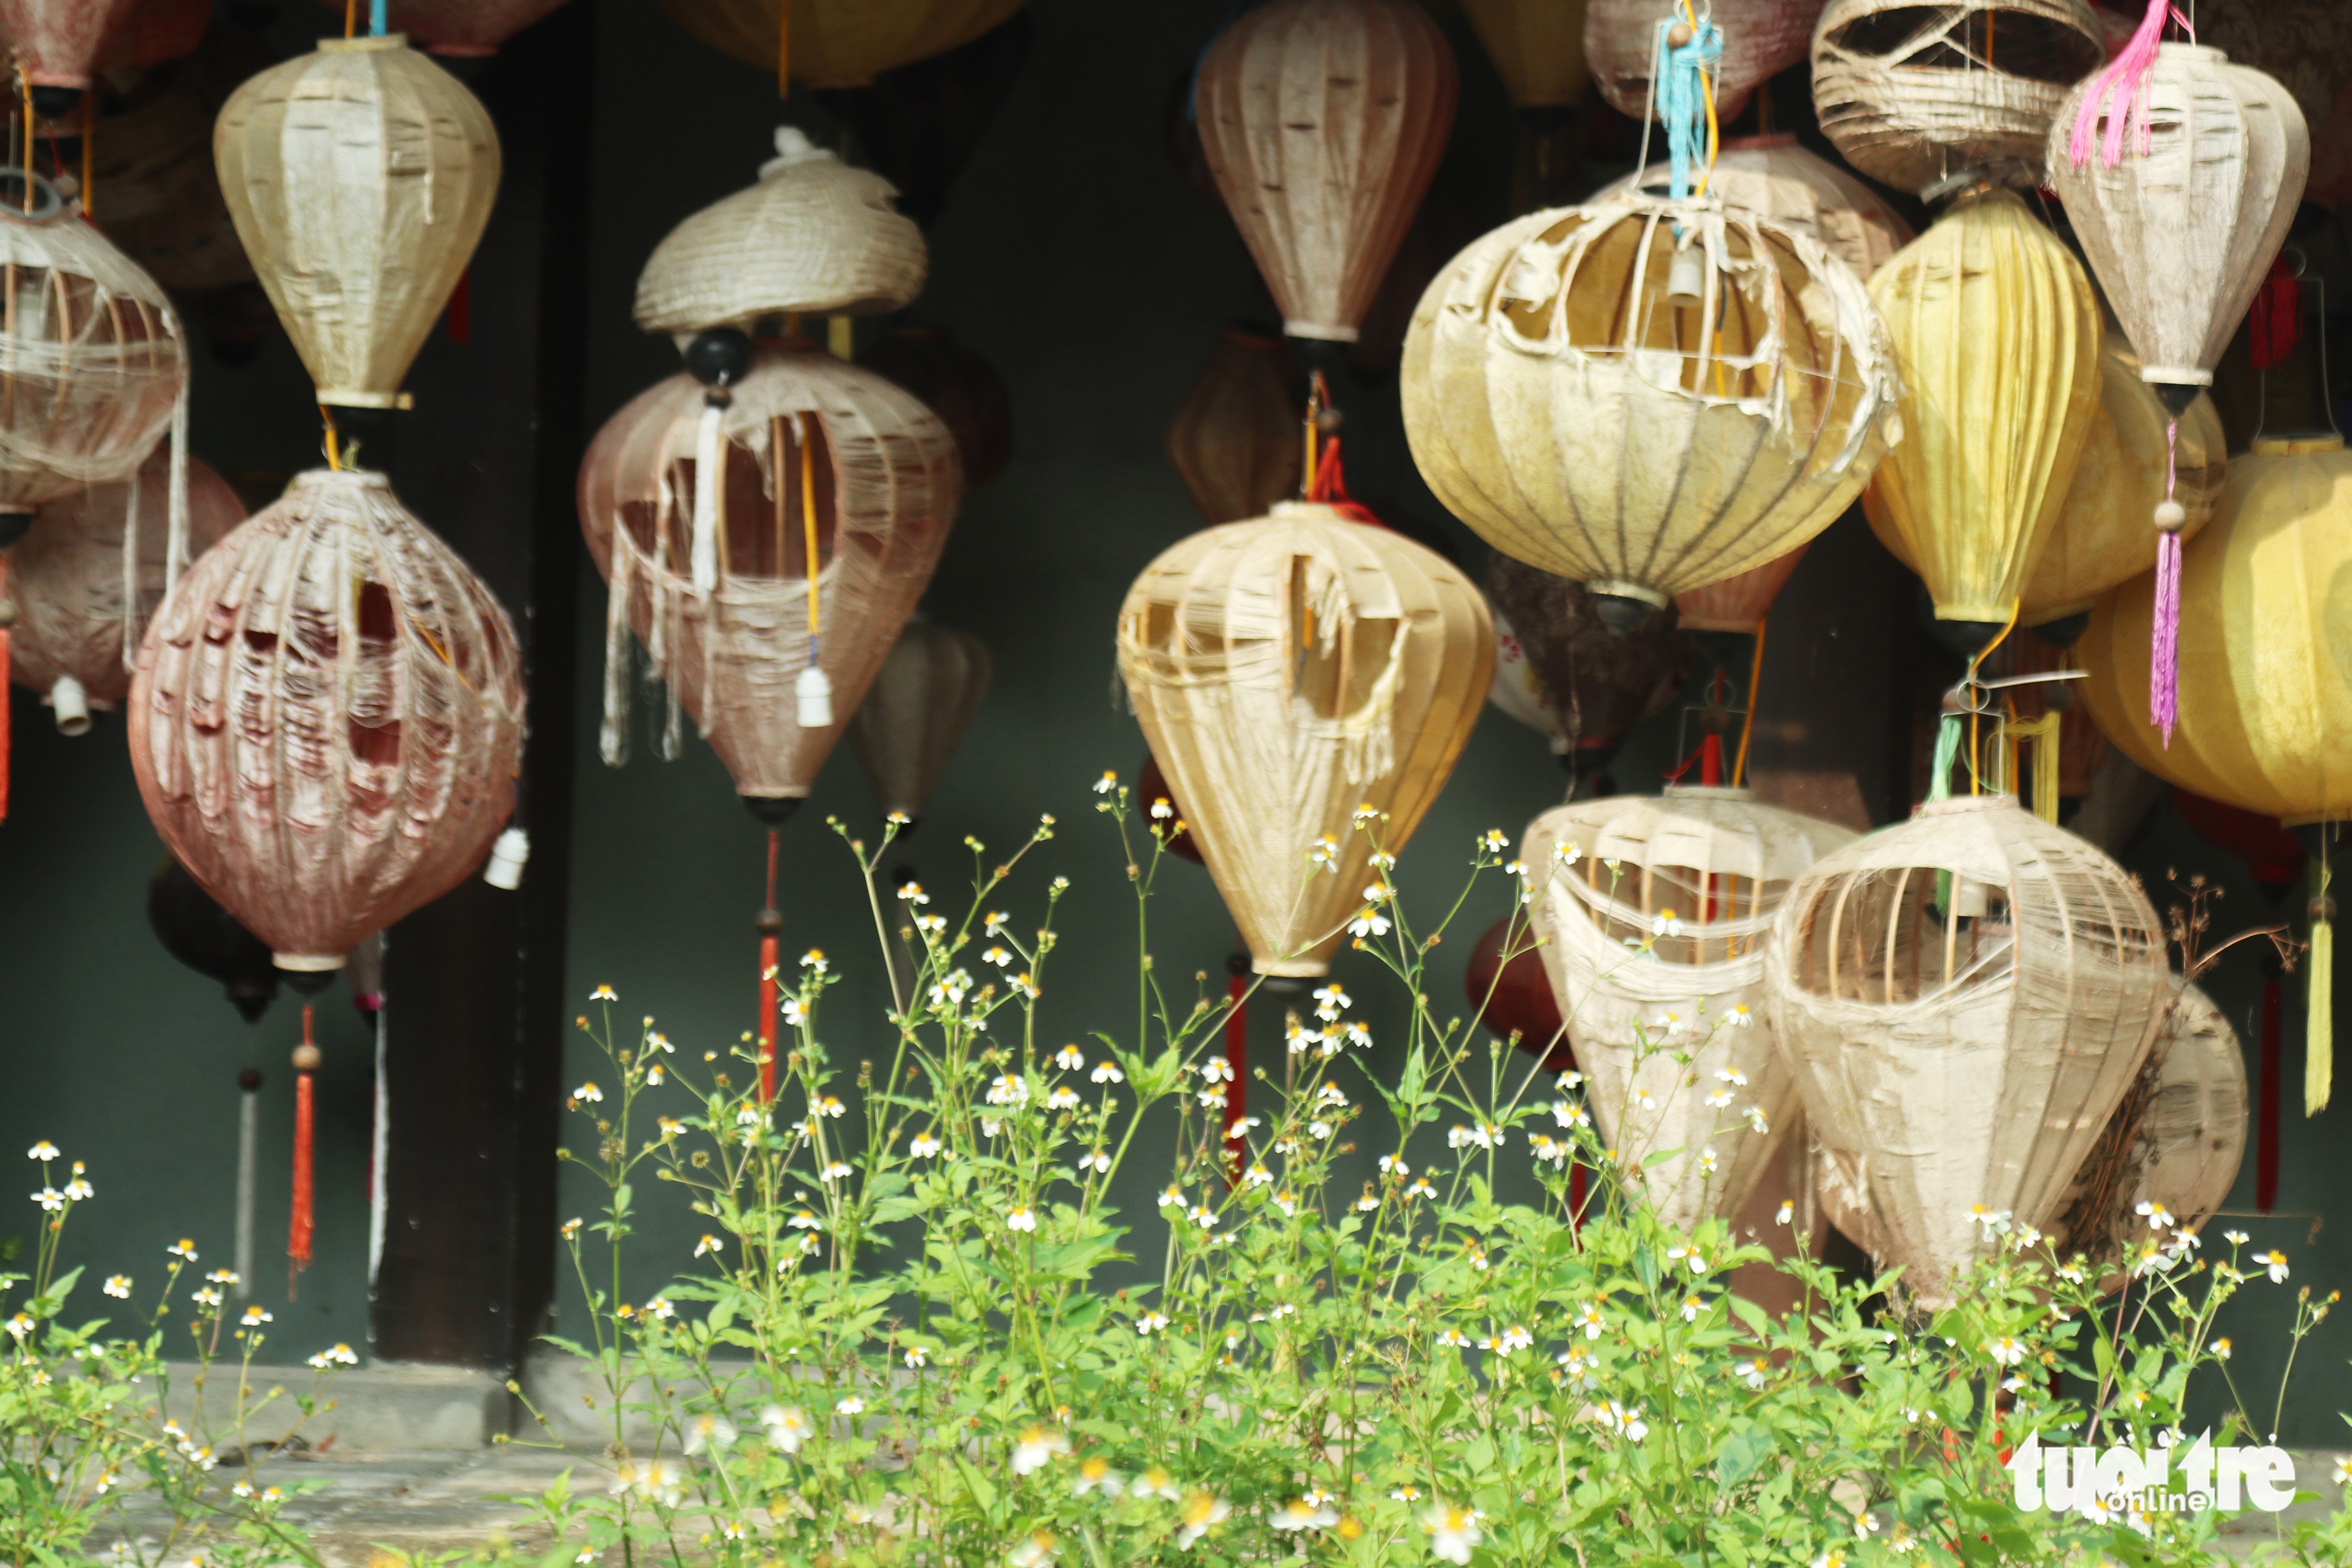 Torn lanterns are pictured against grass growing at a row of houses built to simulate Hoi An Ancient Town at the Vinh City central park in the heart of Vinh City in Nghe An Province, Vietnam. Photo: Doan Hoa / Tuoi Tre